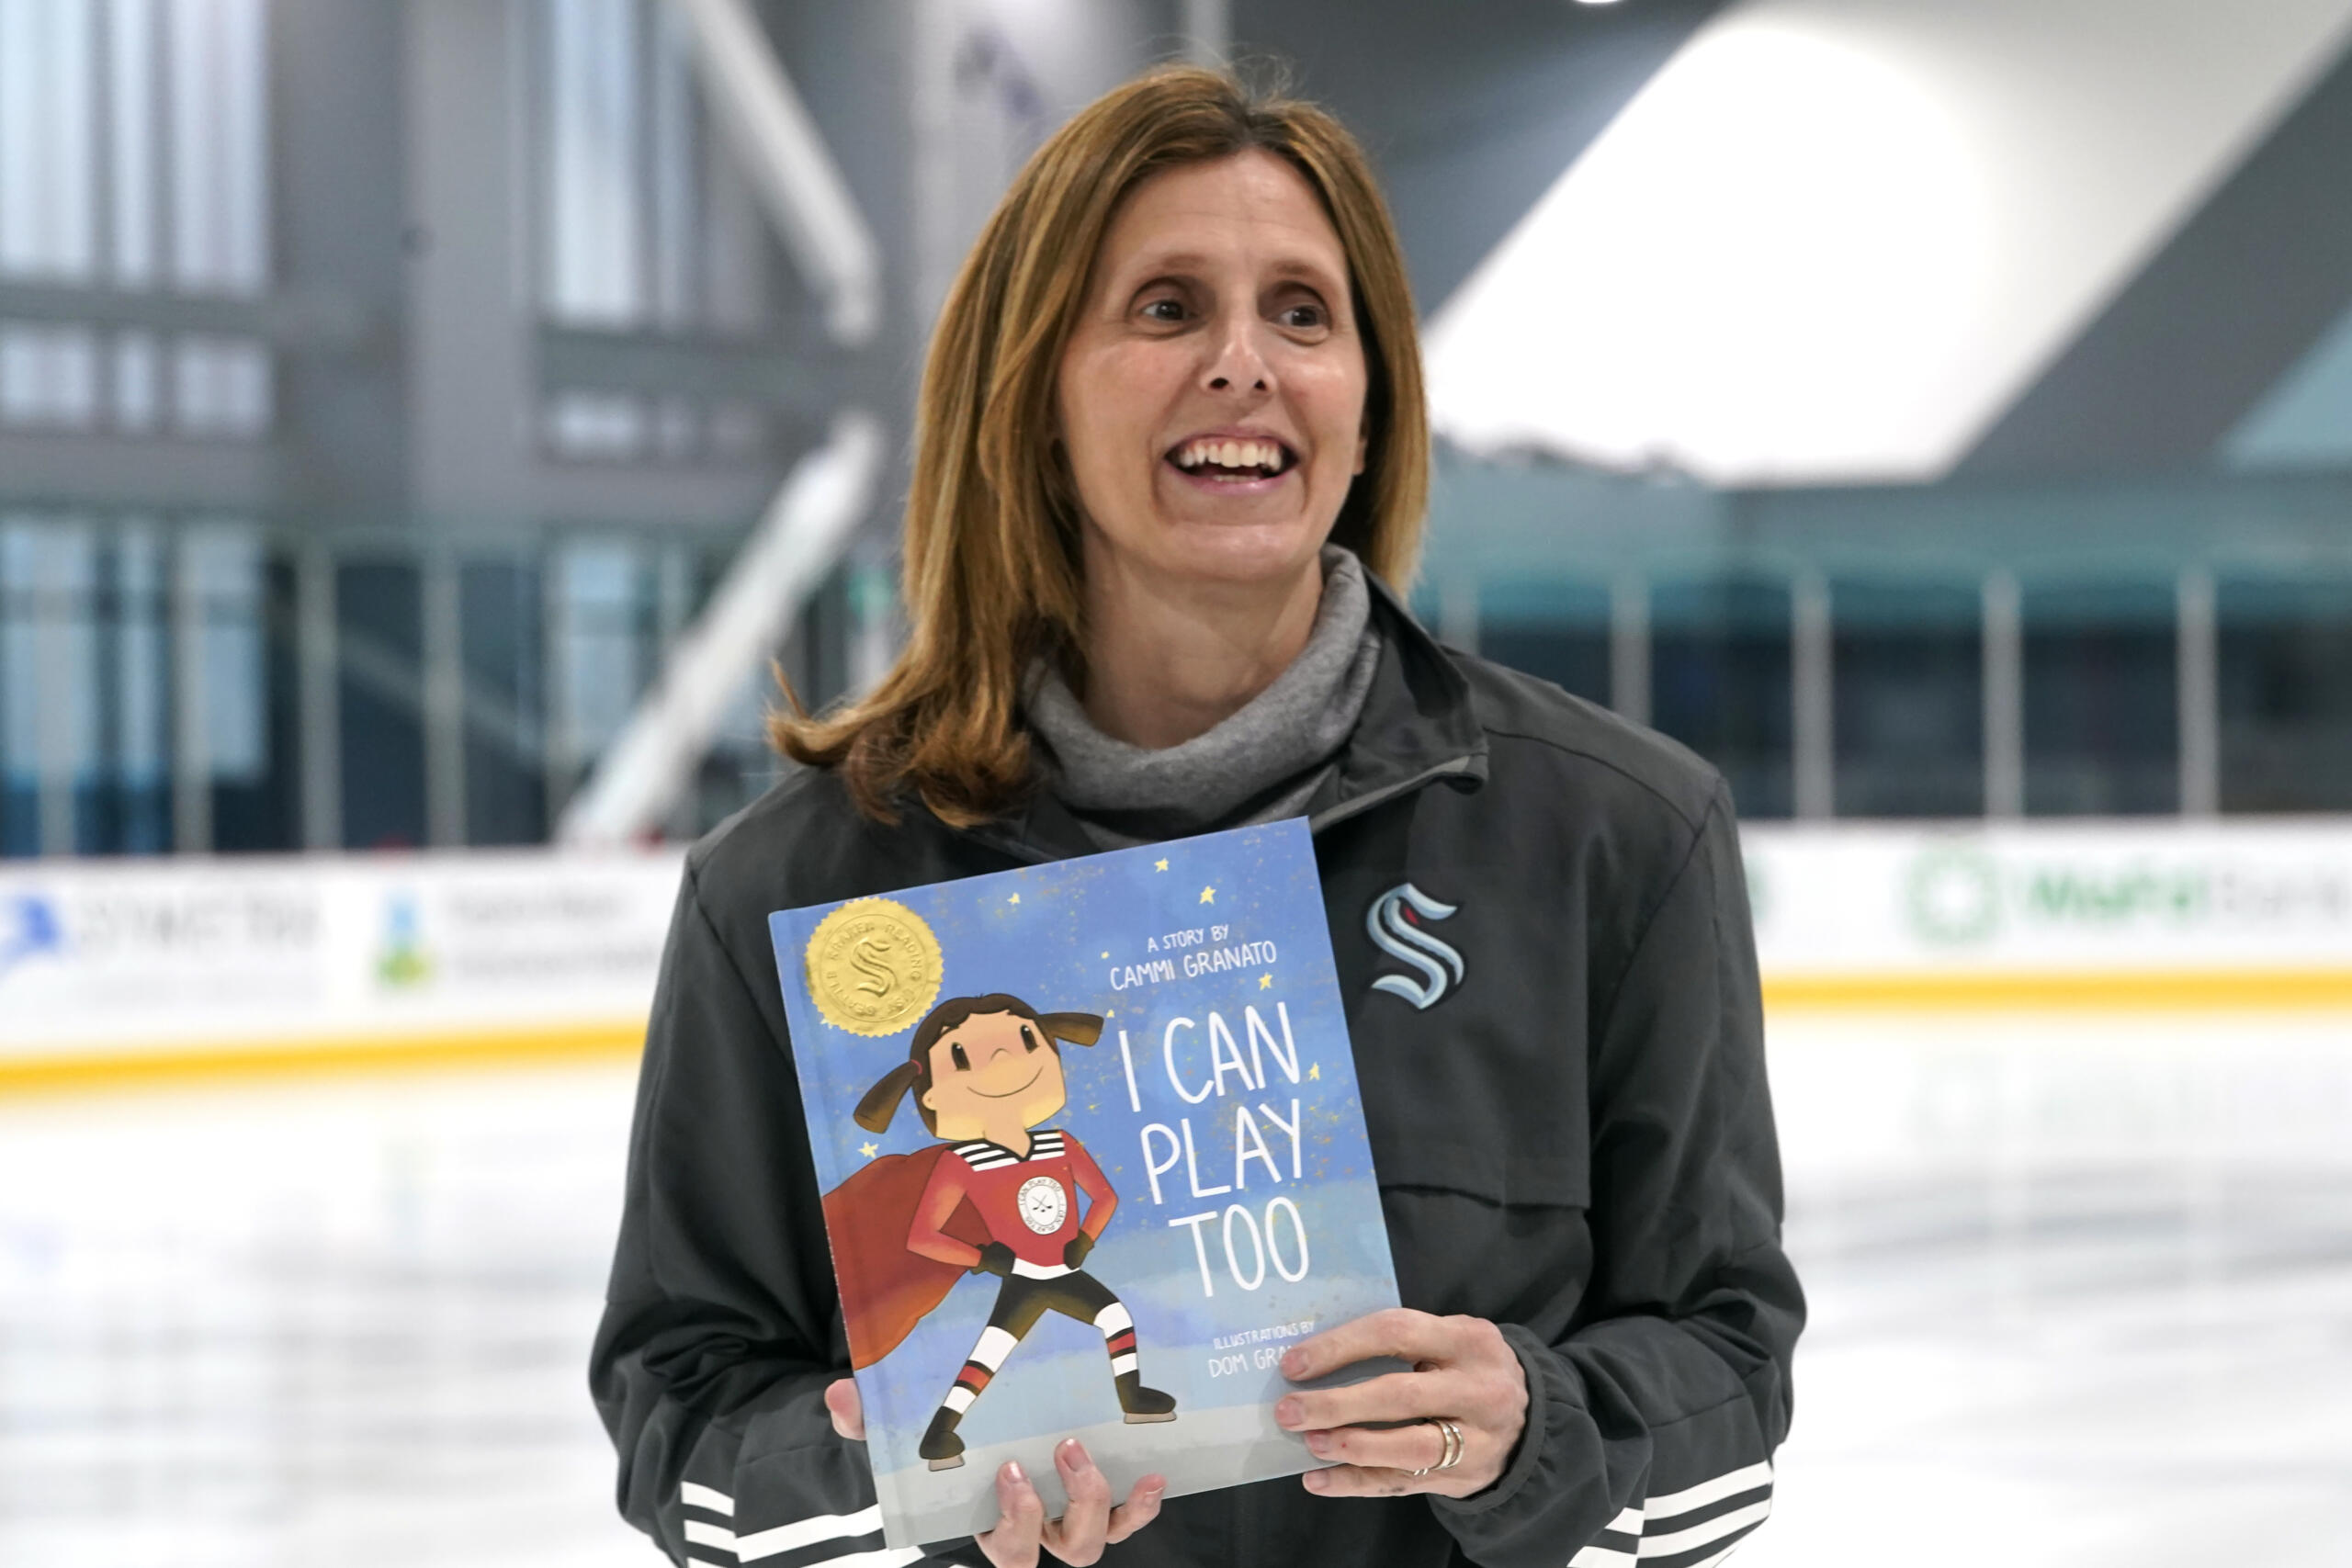 Seattle Kraken NHL hockey team pro scout Cammi Granato poses with her new book, "I Can Play Too," Wednesday, Feb. 2, 2022, in Seattle. For years, Hockey Hall of Famer Granato was asked to write a book about her experience in becoming one of the finest women's hockey players of all time. She finally has, but on her own terms and with a specific audience in mind—kids. And while her book is based around hockey and her personal experiences, Granato is hoping the message can resonate beyond the ice.